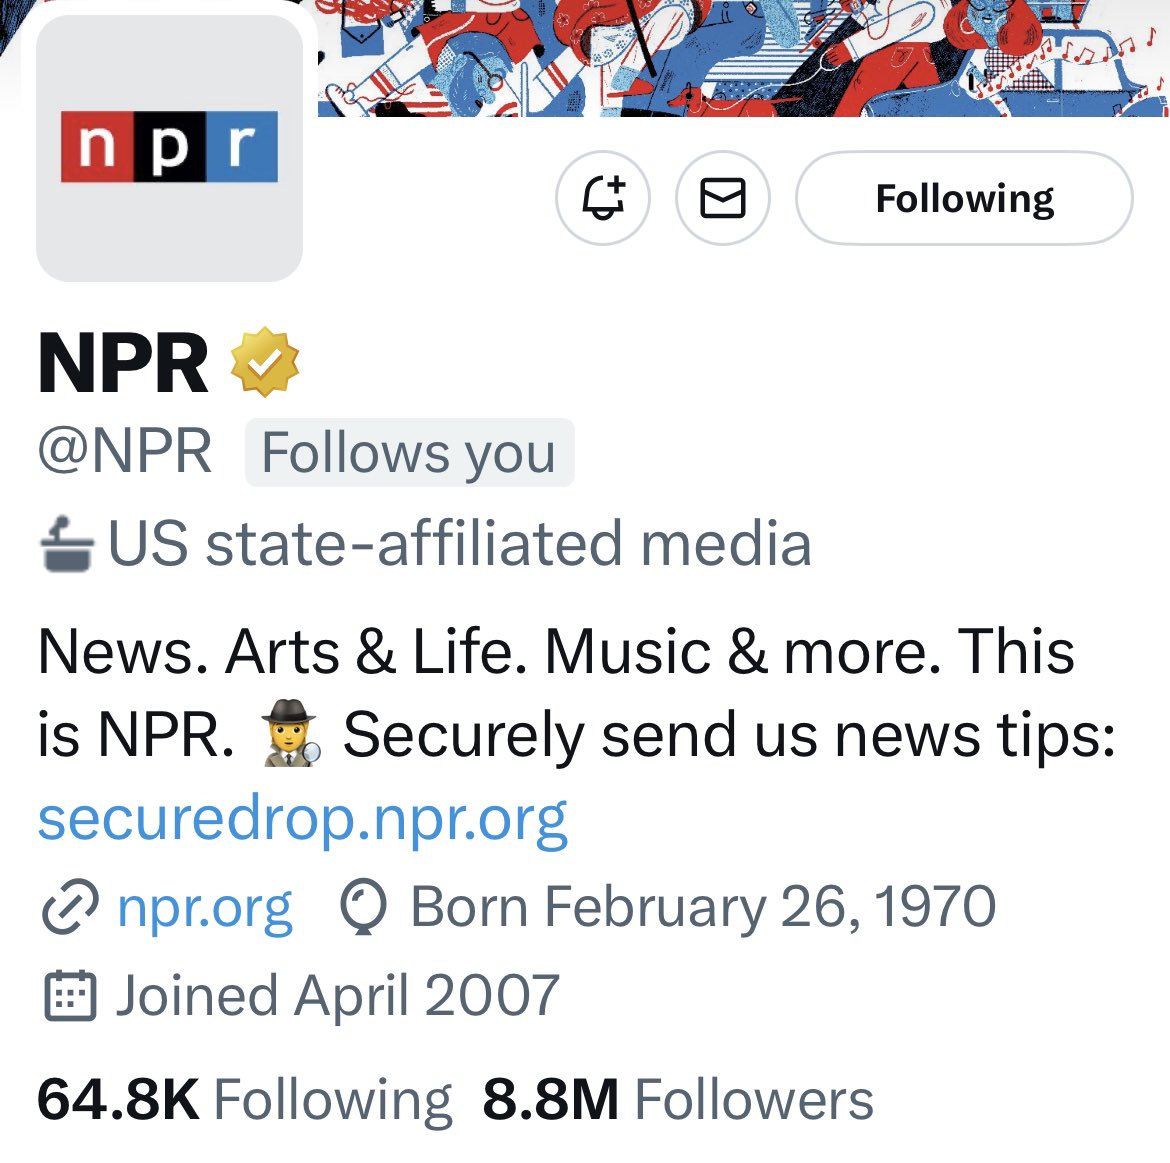 NPR is not state affiliated media. It is public media. The NYT is not propaganda. It is the most robust news organization in the English speaking world. The bias as to who is being targeted on this site by its leadership is so very clear. And it’s not a small thing.